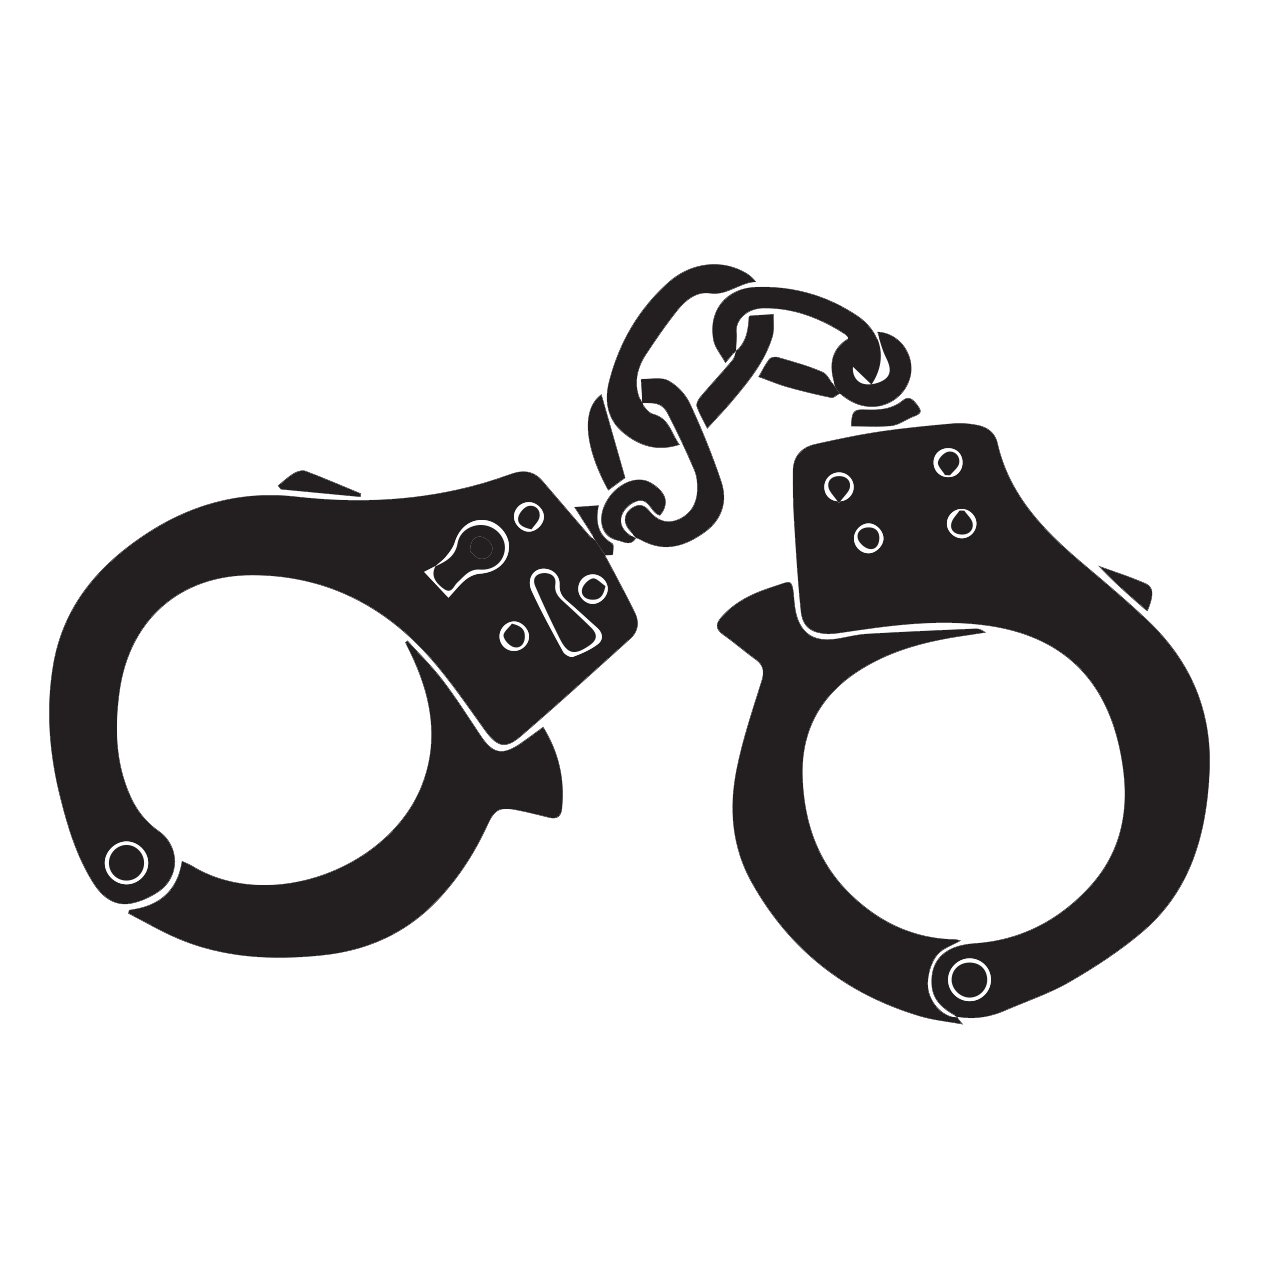 Handcuffs clipart tool. Police officer clip art